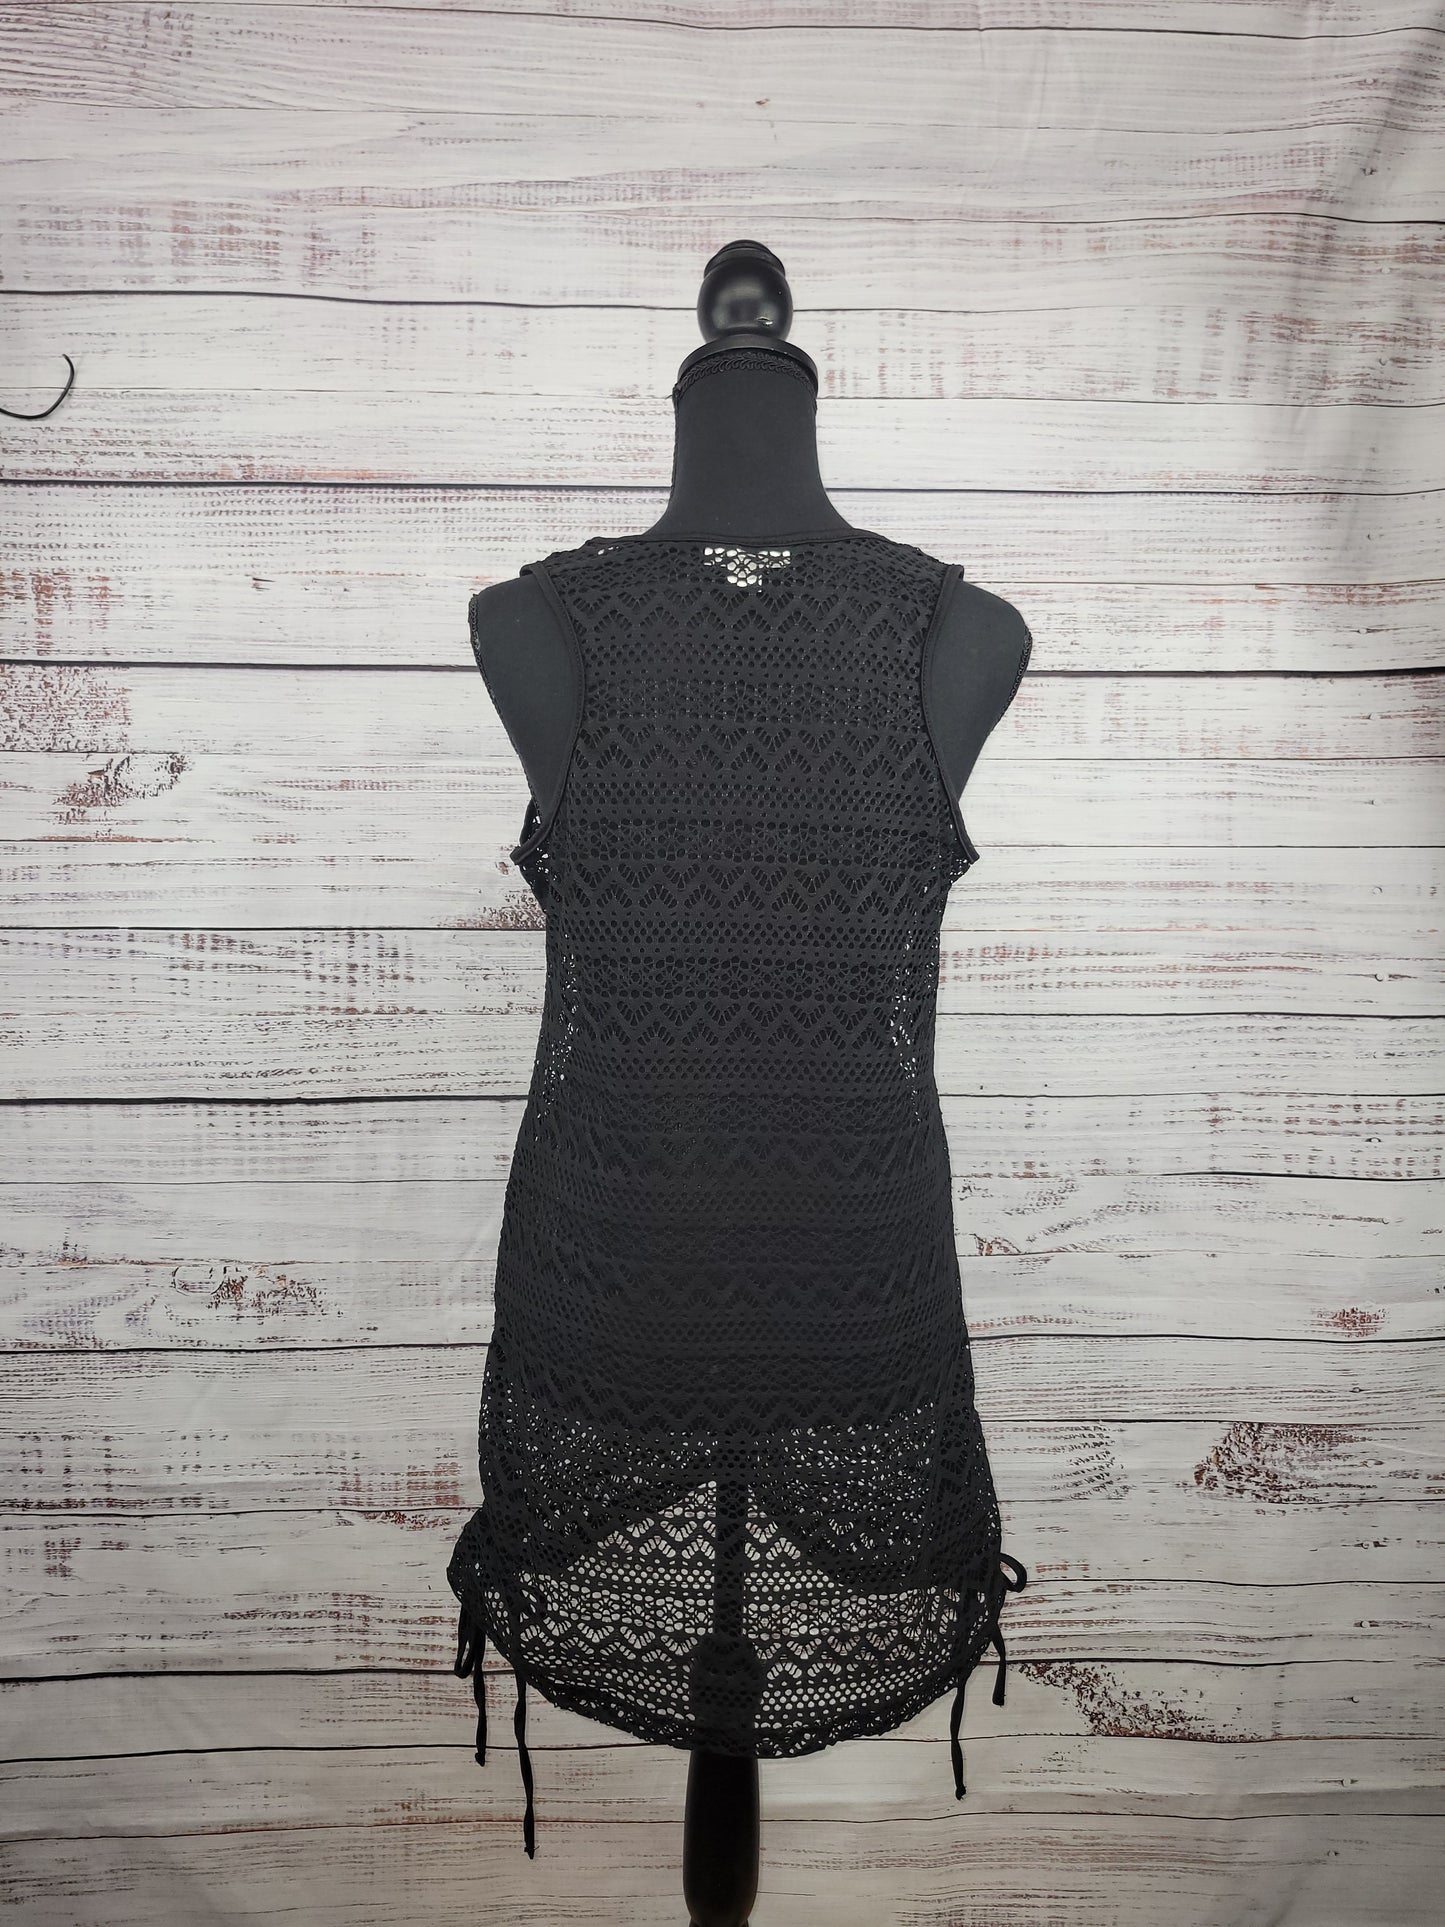 India Boutique See Through Fishnet Cover Up